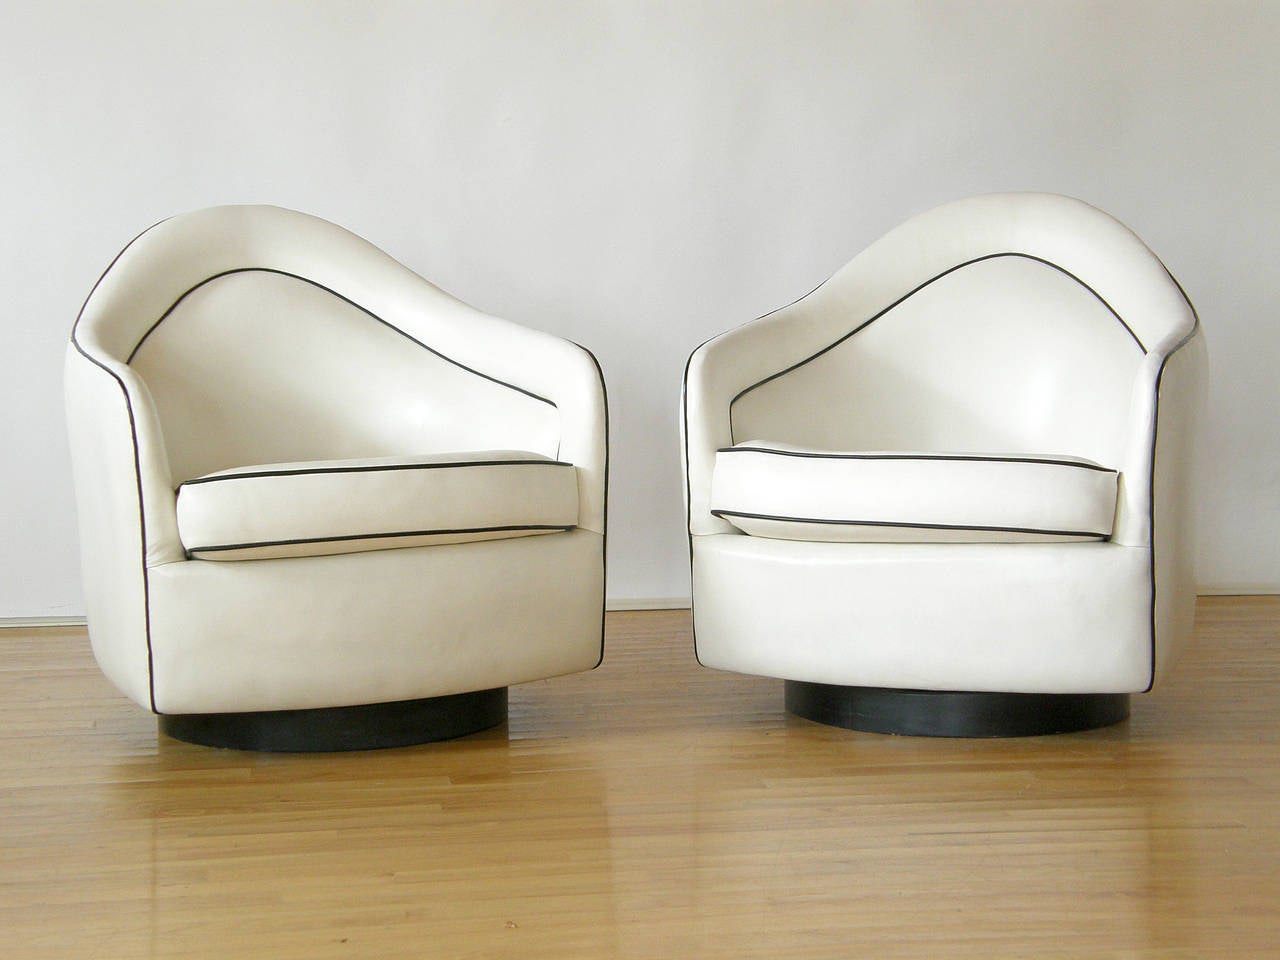 Milo Baughman lounge chairs with tilting and swiveling bases.

Please contact us if you have any questions.